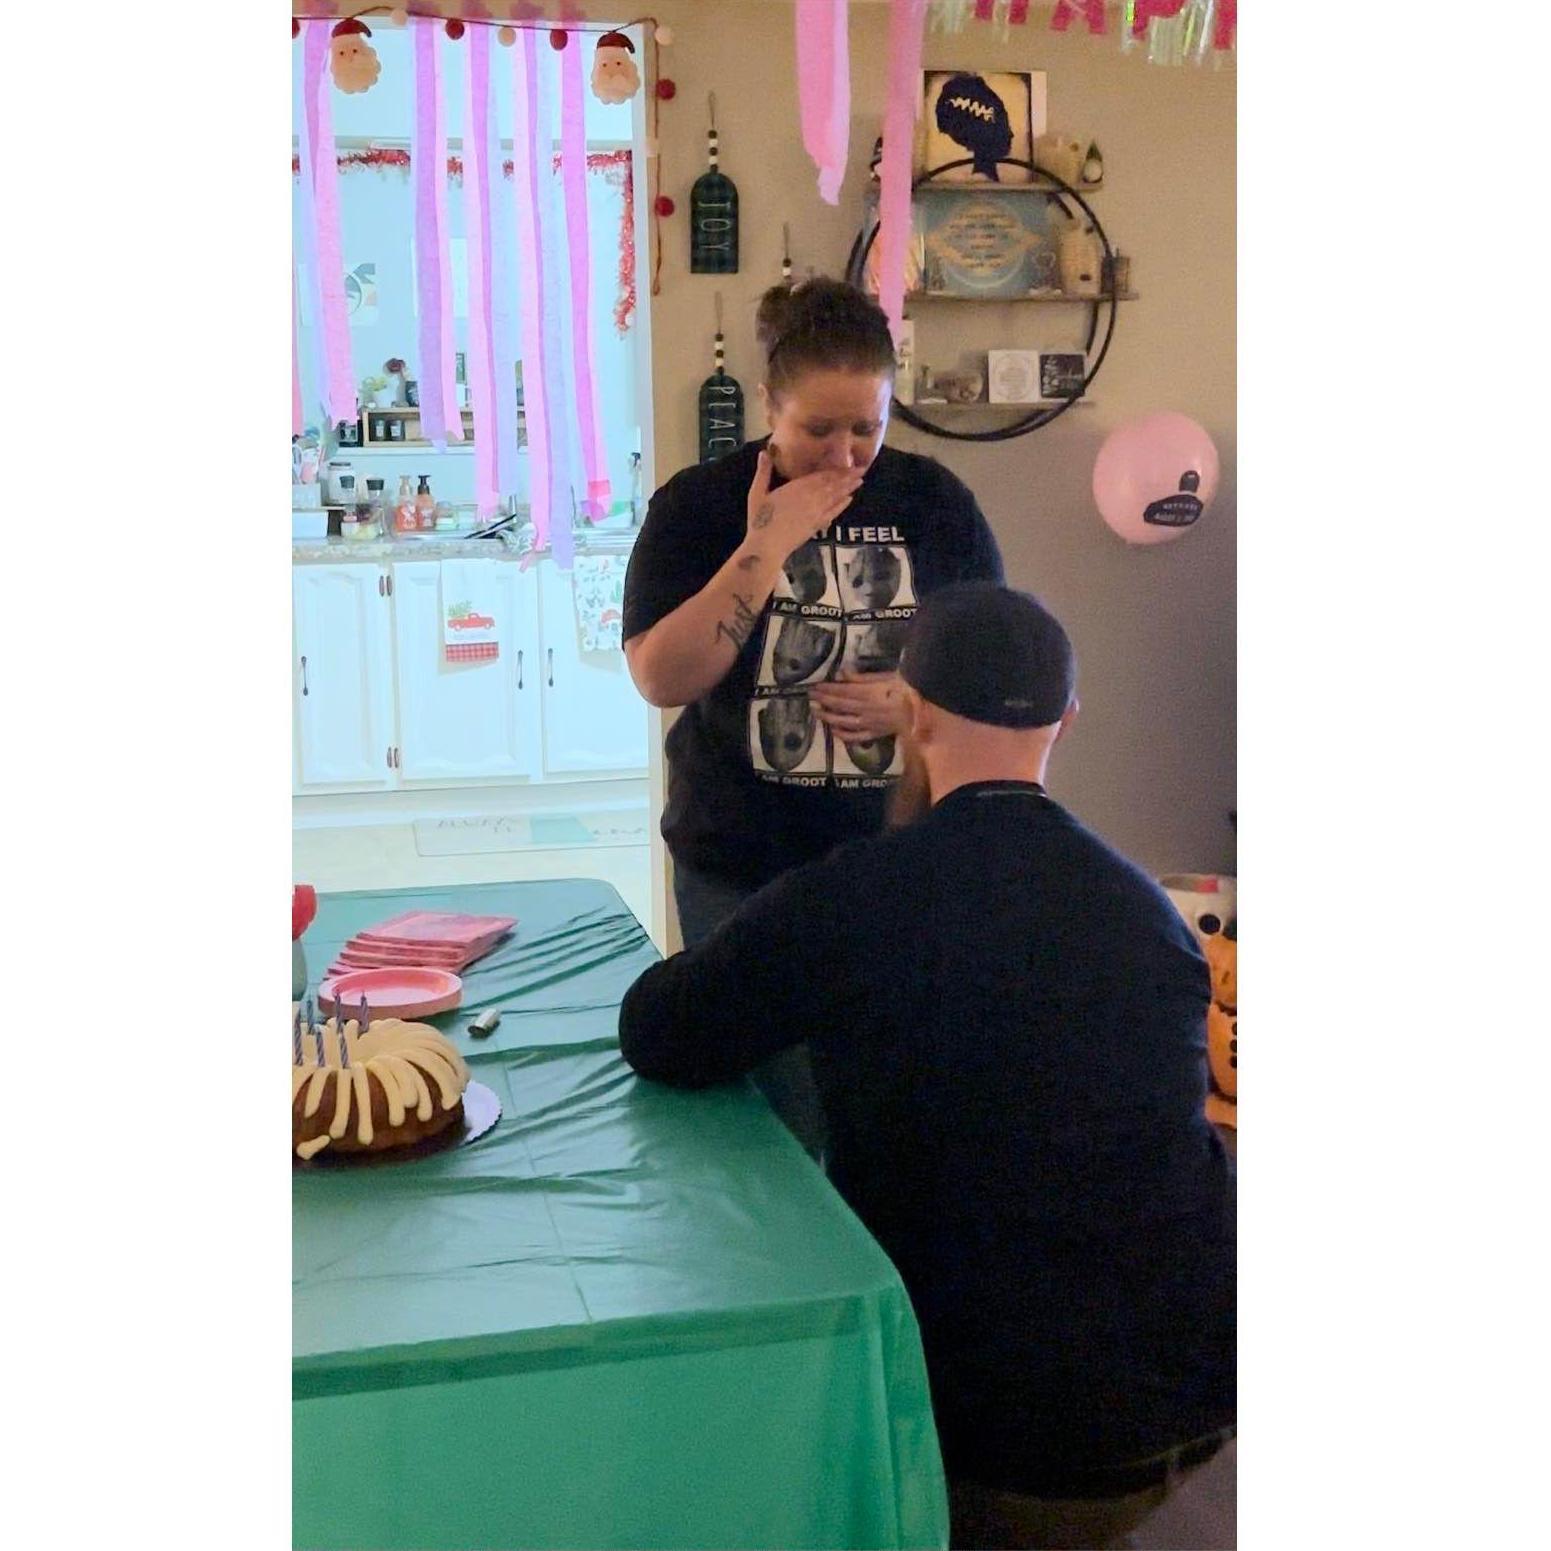 He proposed...at his birthday party!
12/18/22